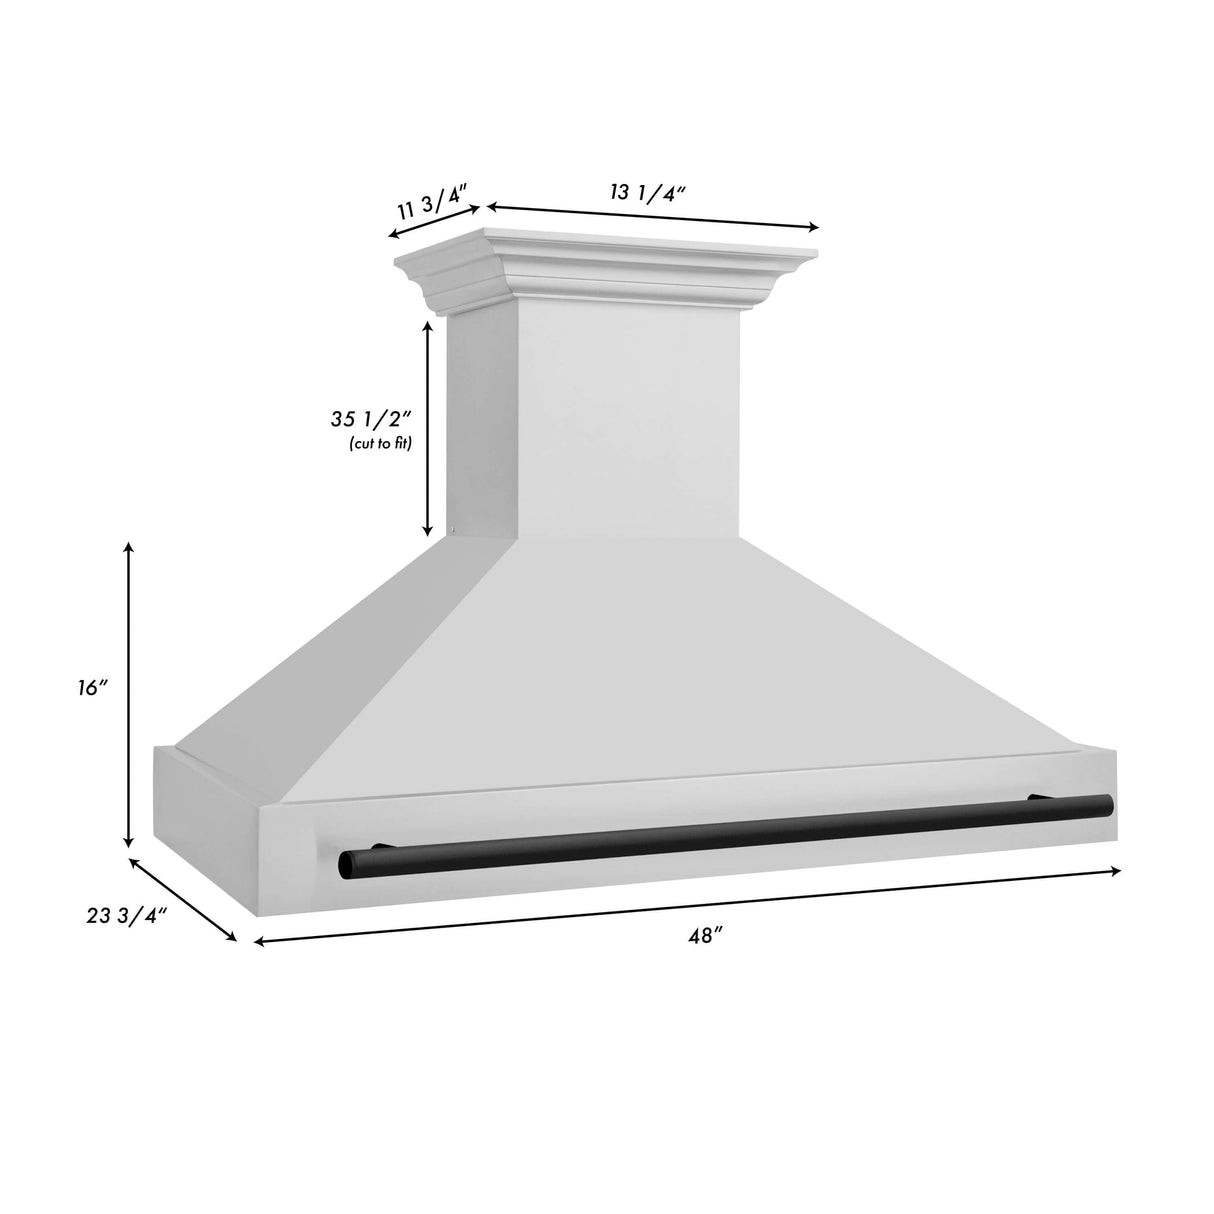 ZLINE Autograph Edition 48 in. Stainless Steel Range Hood with Stainless Steel Shell and Matte Black Handle (8654STZ-48-MB)